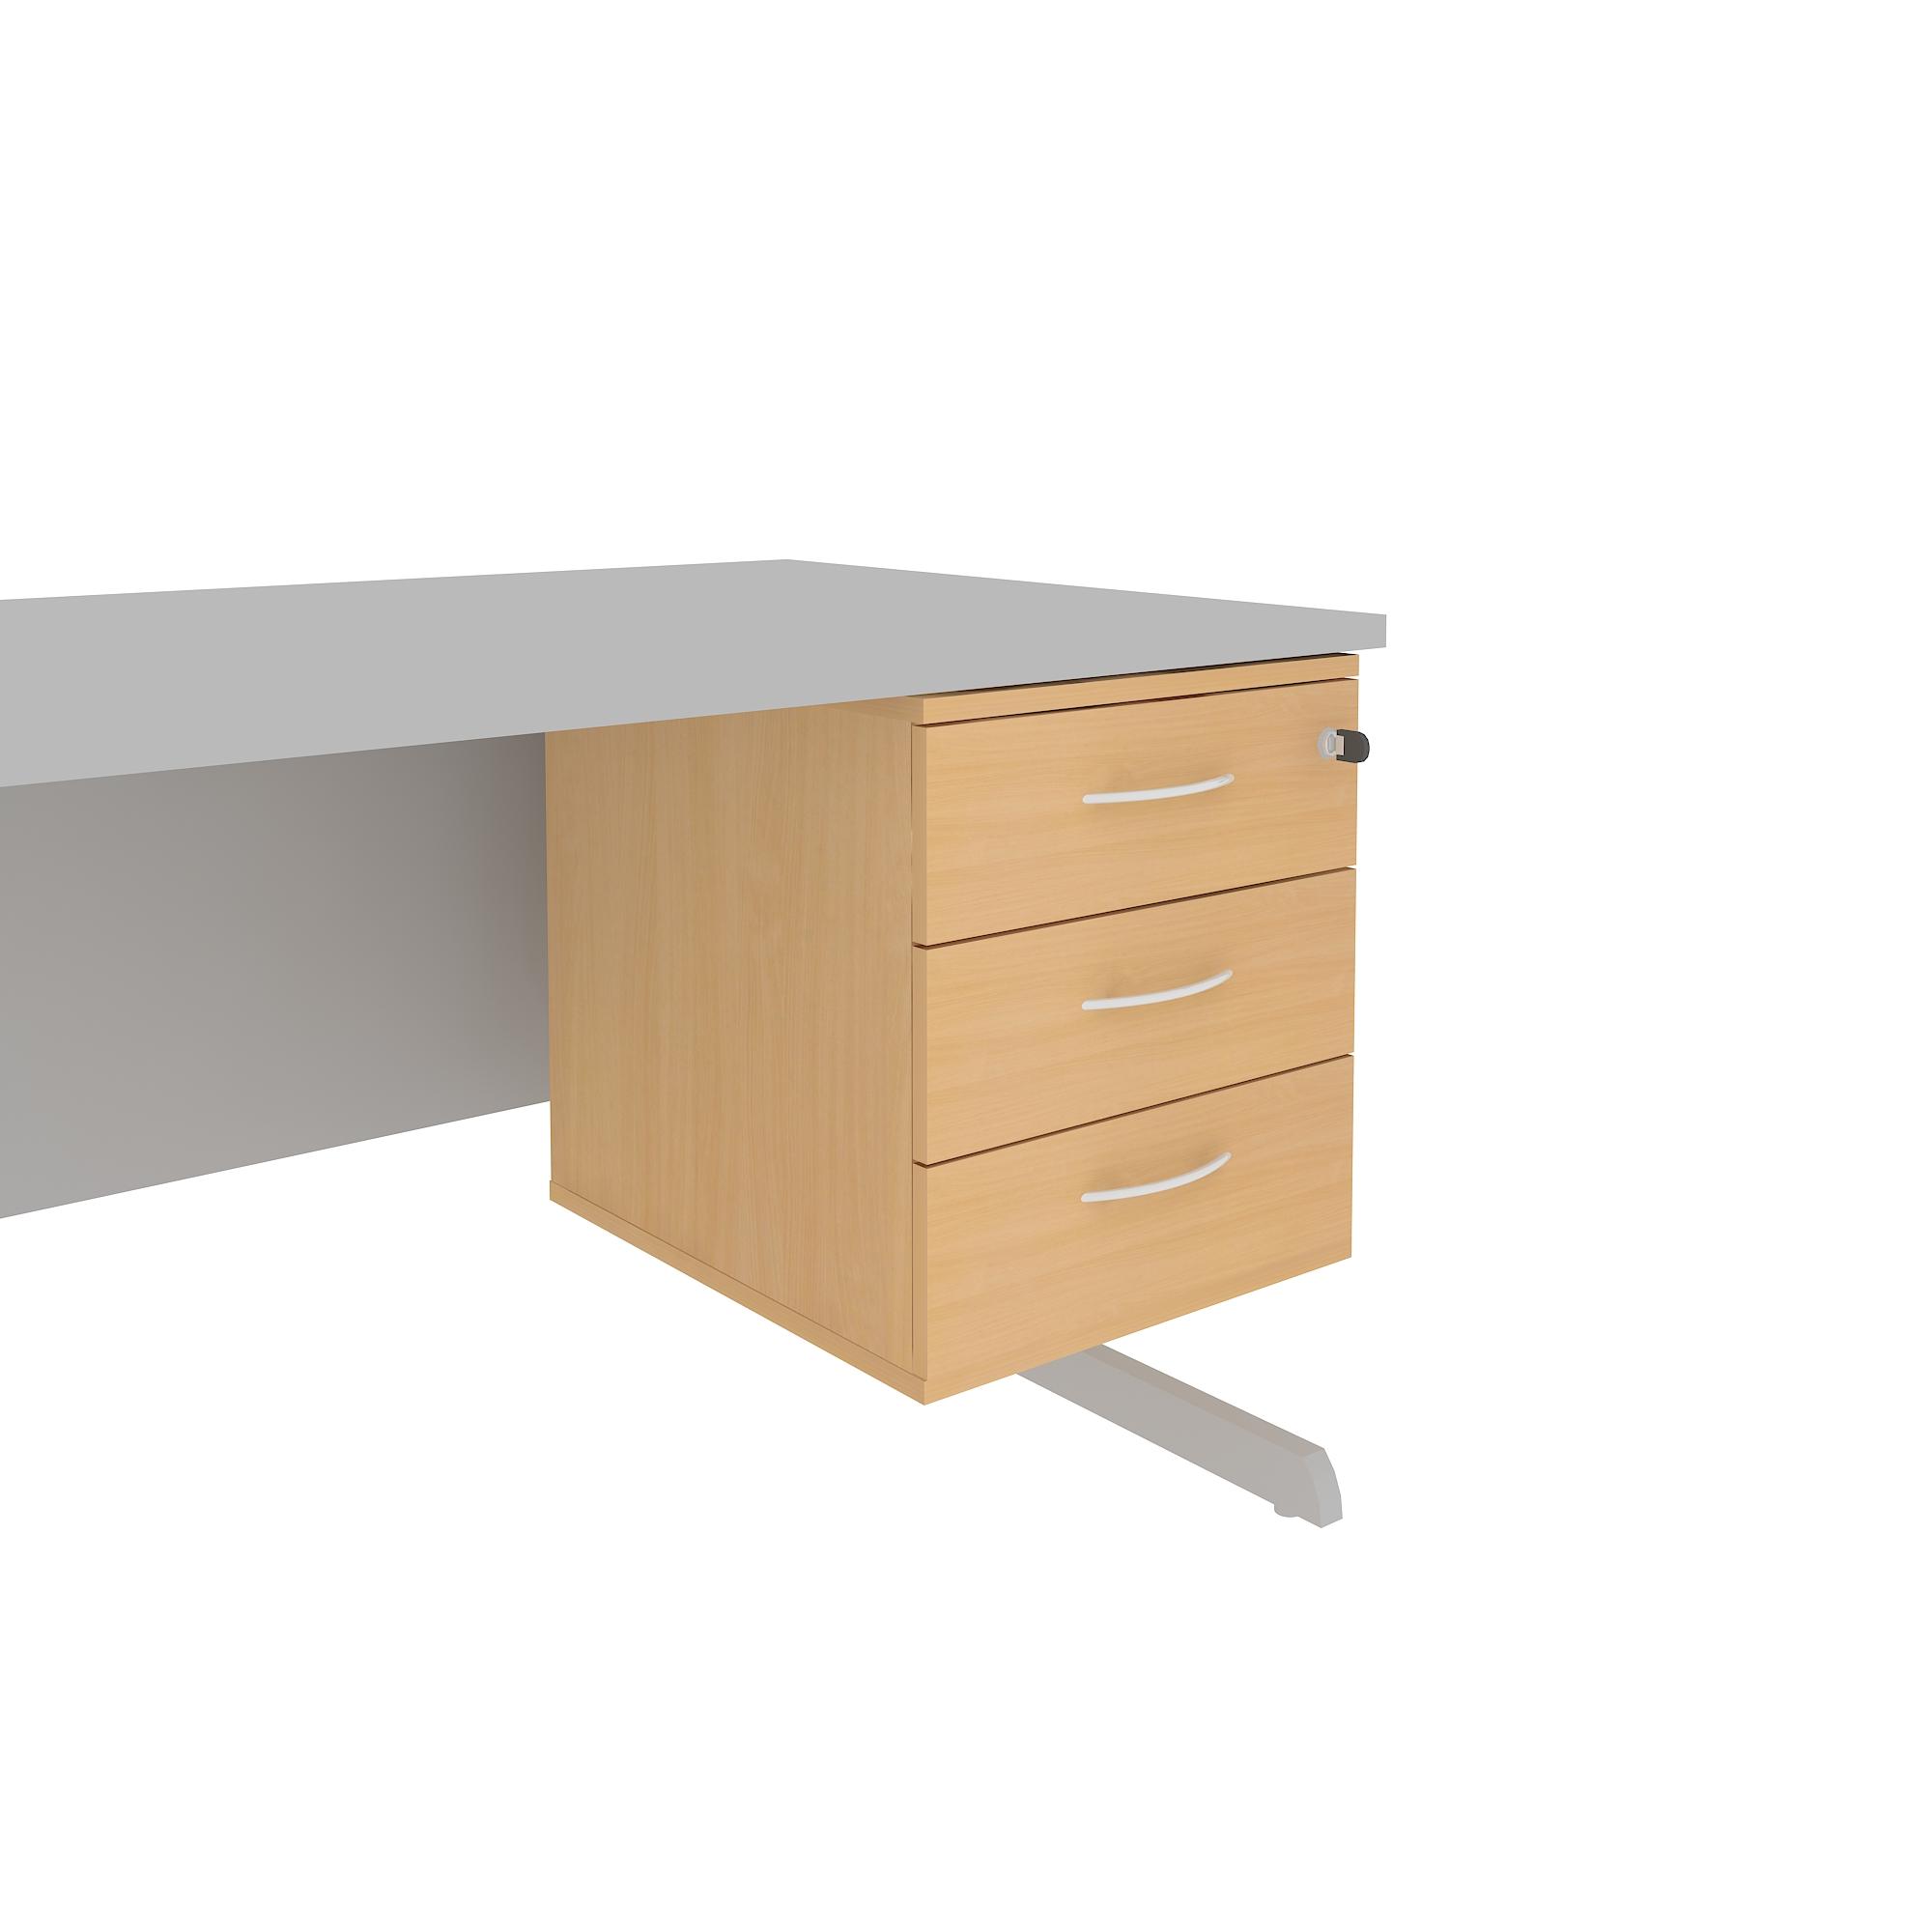 PSP532 Contract Fixed Pedestal with 3 Locking Drawers